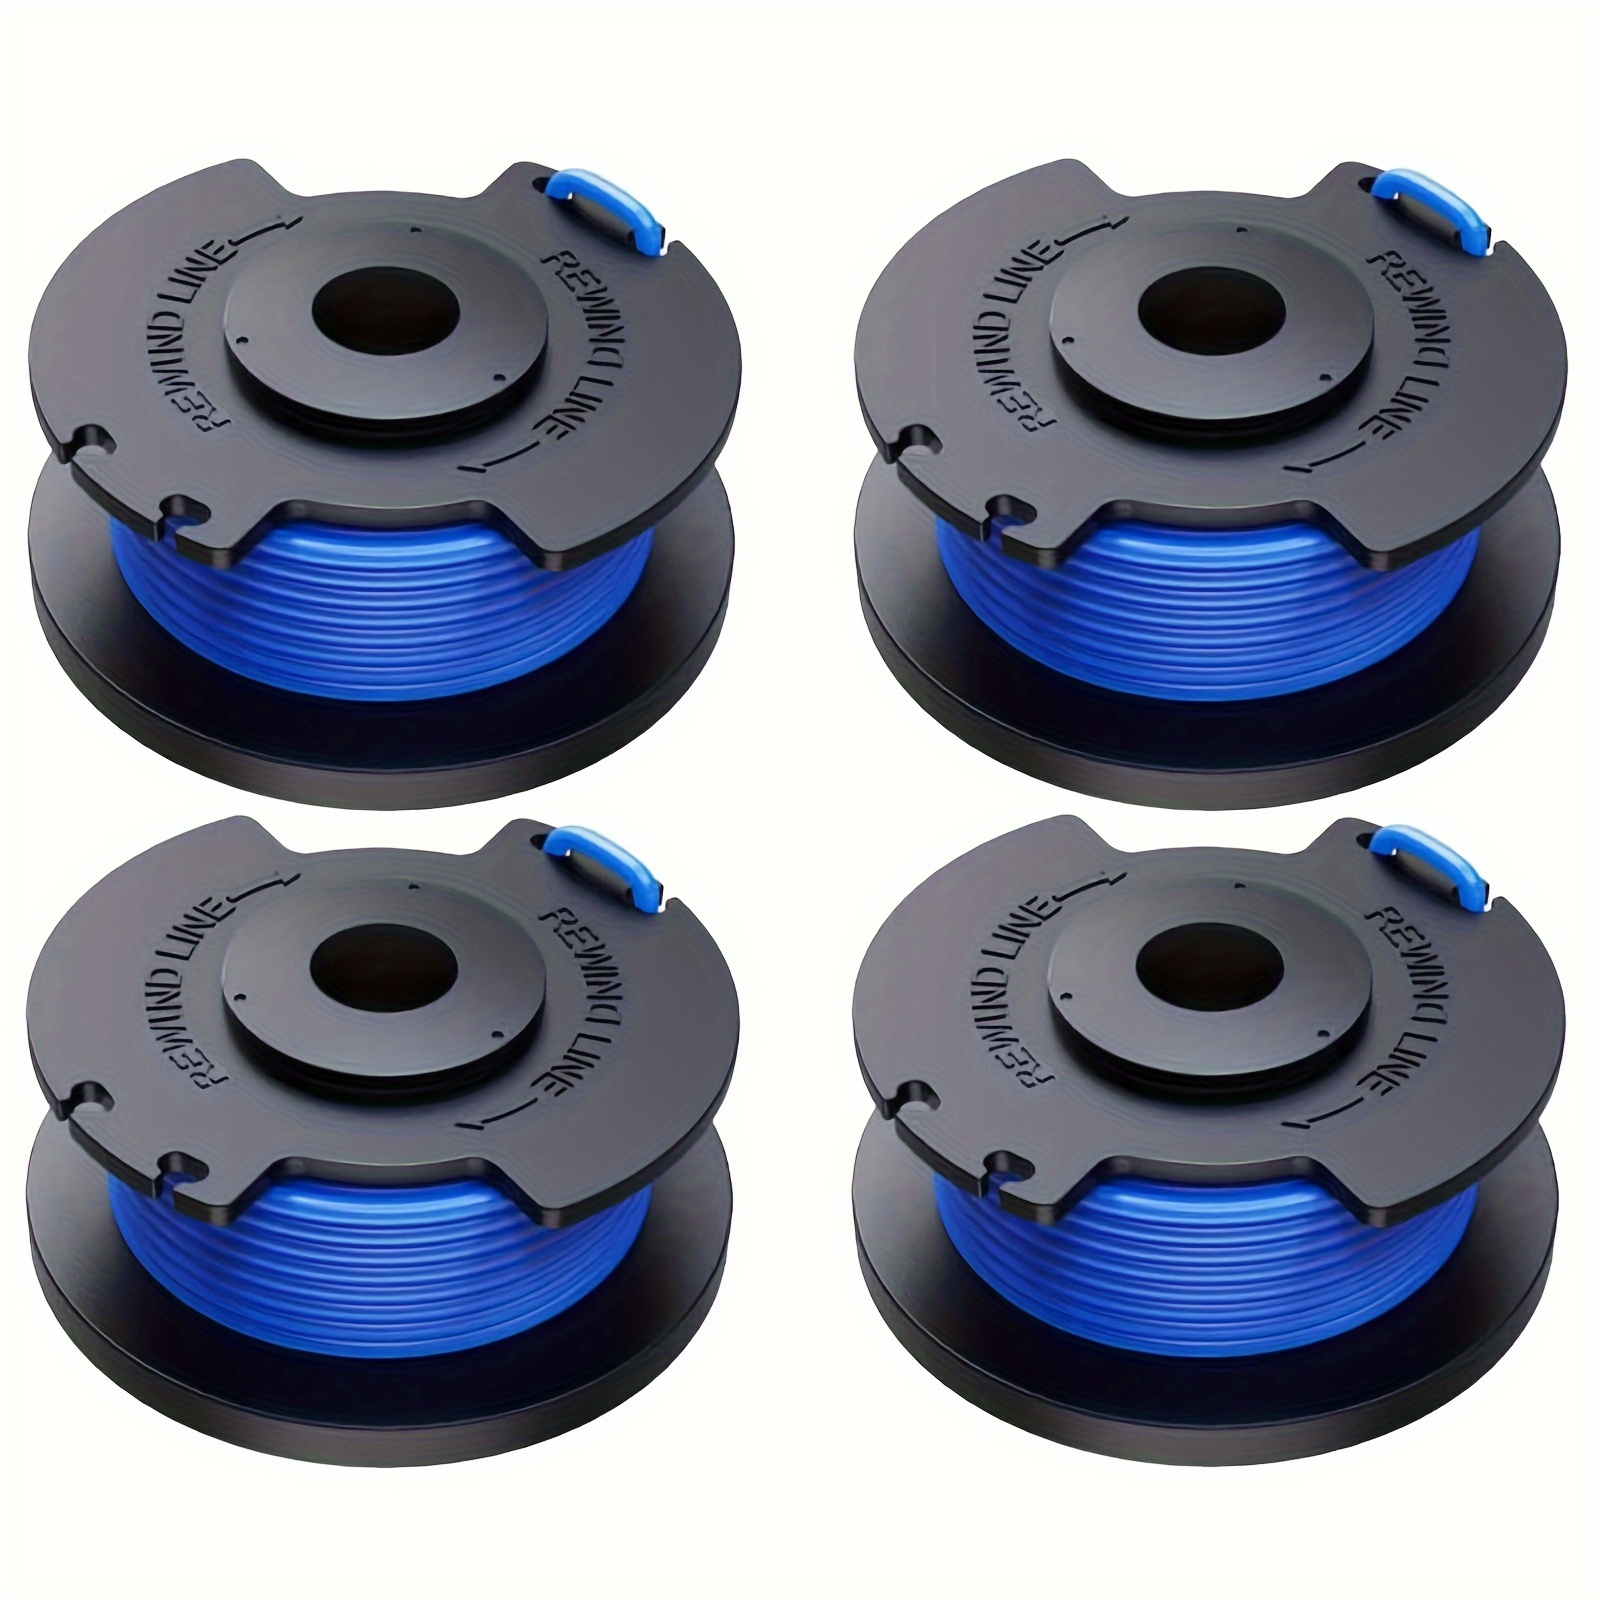 

4pcs String Trimmer Line Compatible With 1 + Ac14rl3a, 11 Ft (3.4mm)/0.065-inch (1.65mm) Autofeed Spools, Trimmer Spool Compatible With 18v, 24v, And 40v Cordless Trimmers